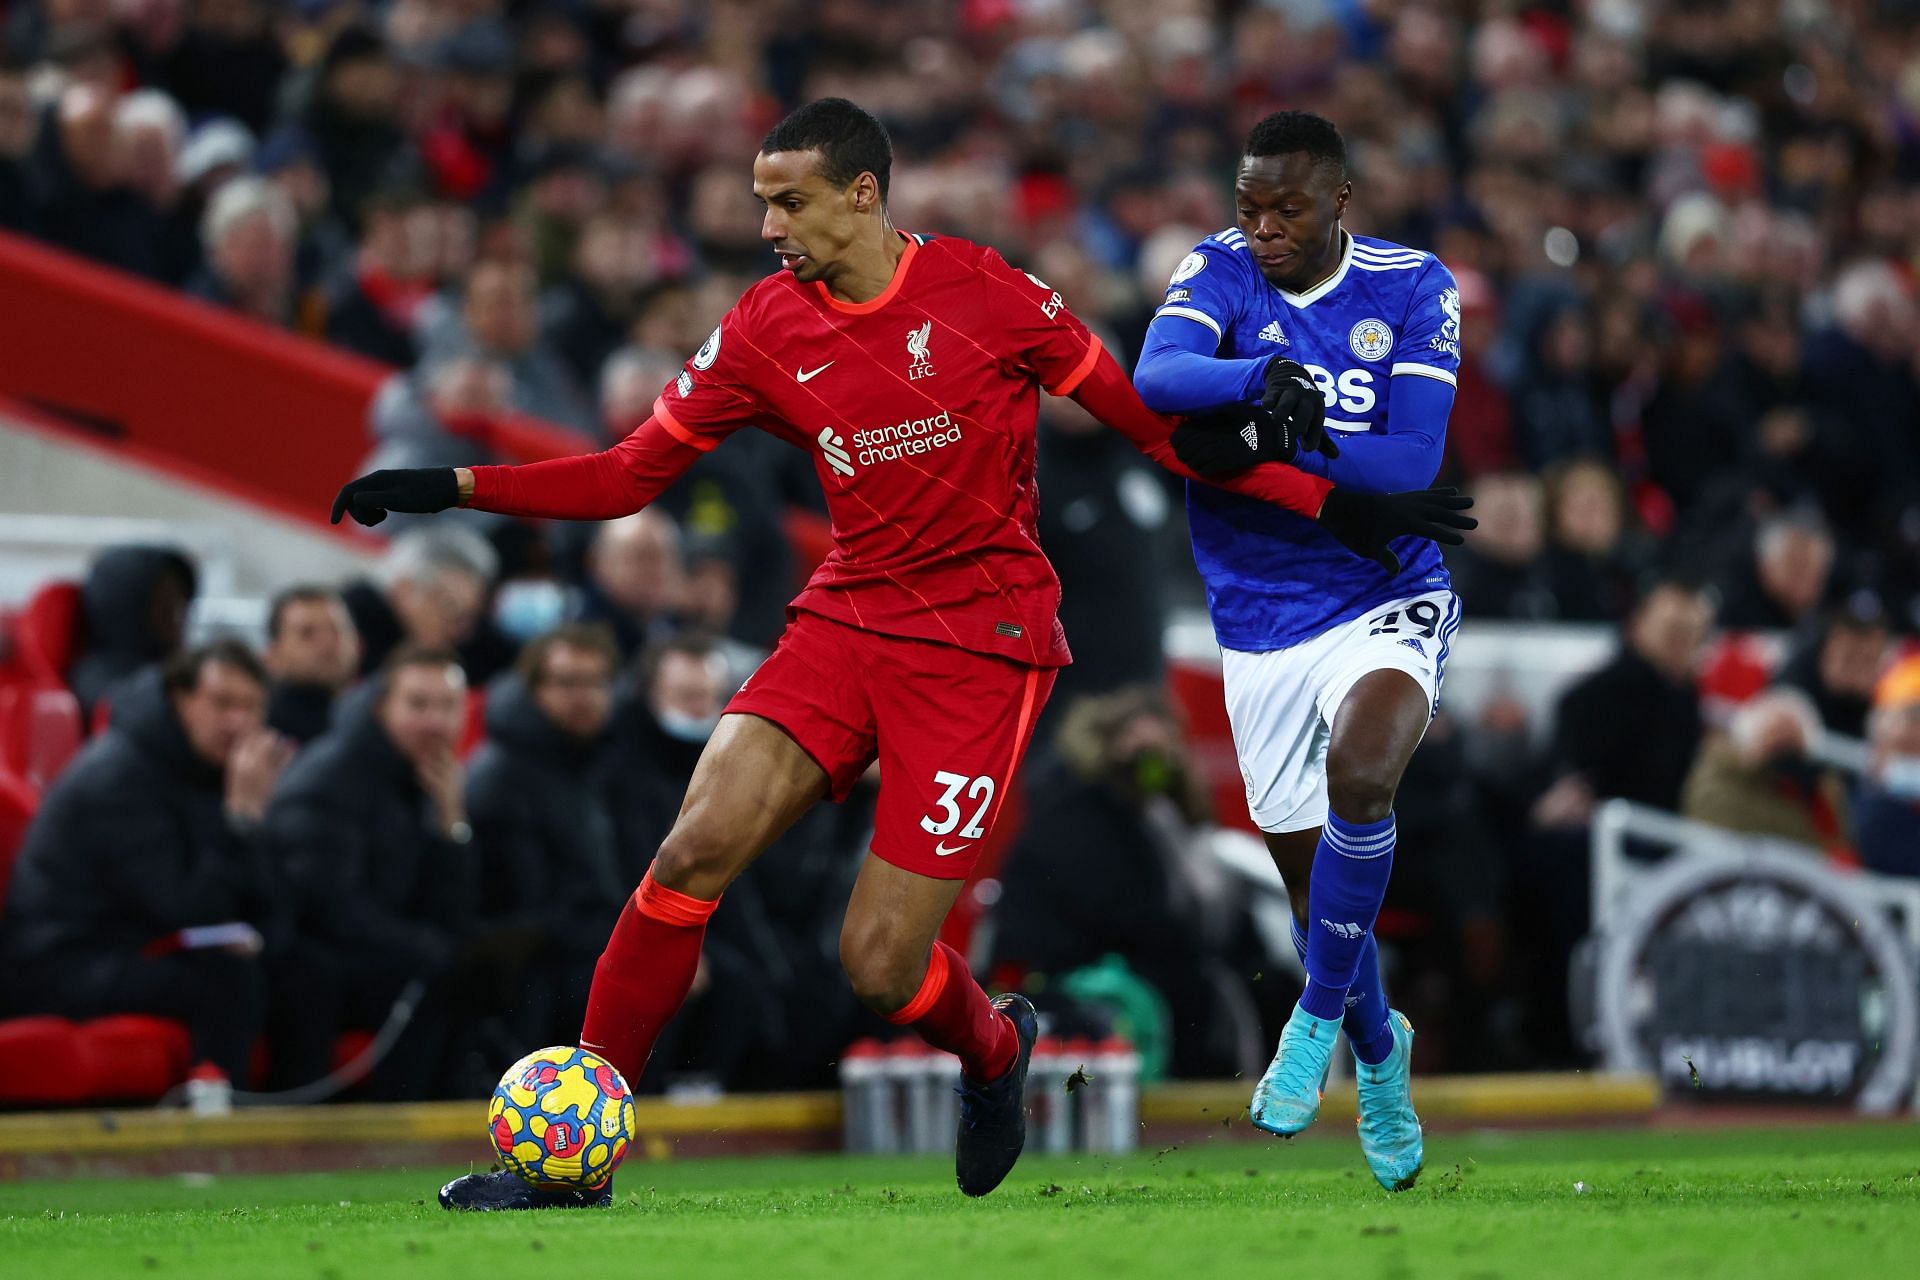 Joel Matip has been a utility player at Liverpool